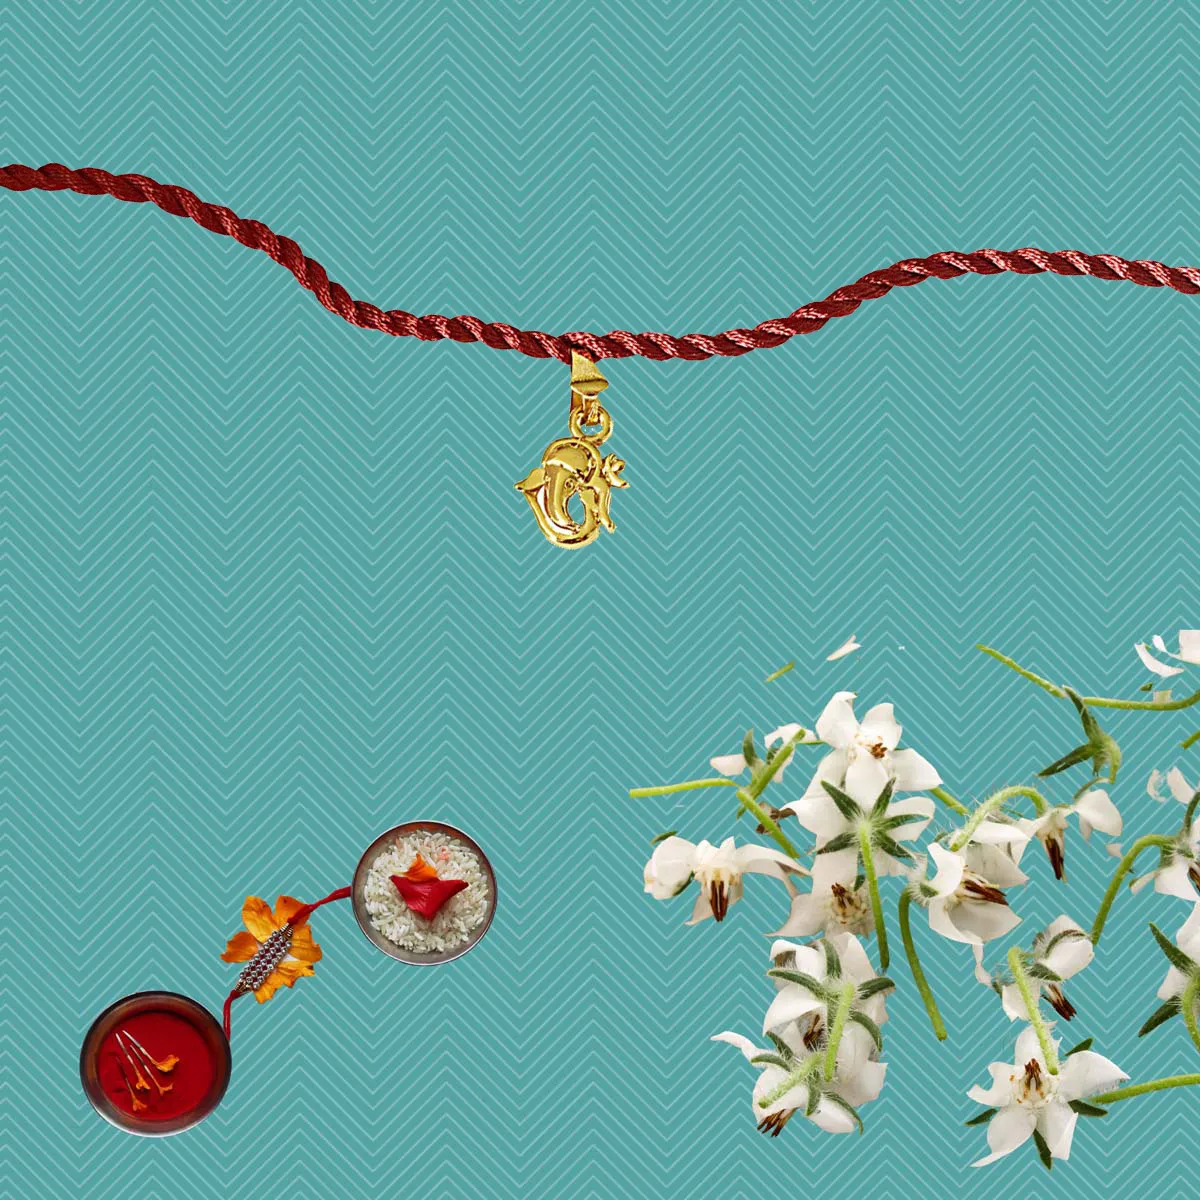 Lord Ganesh Gold Plated Religious Rakhi for Brothers (SNSH10)